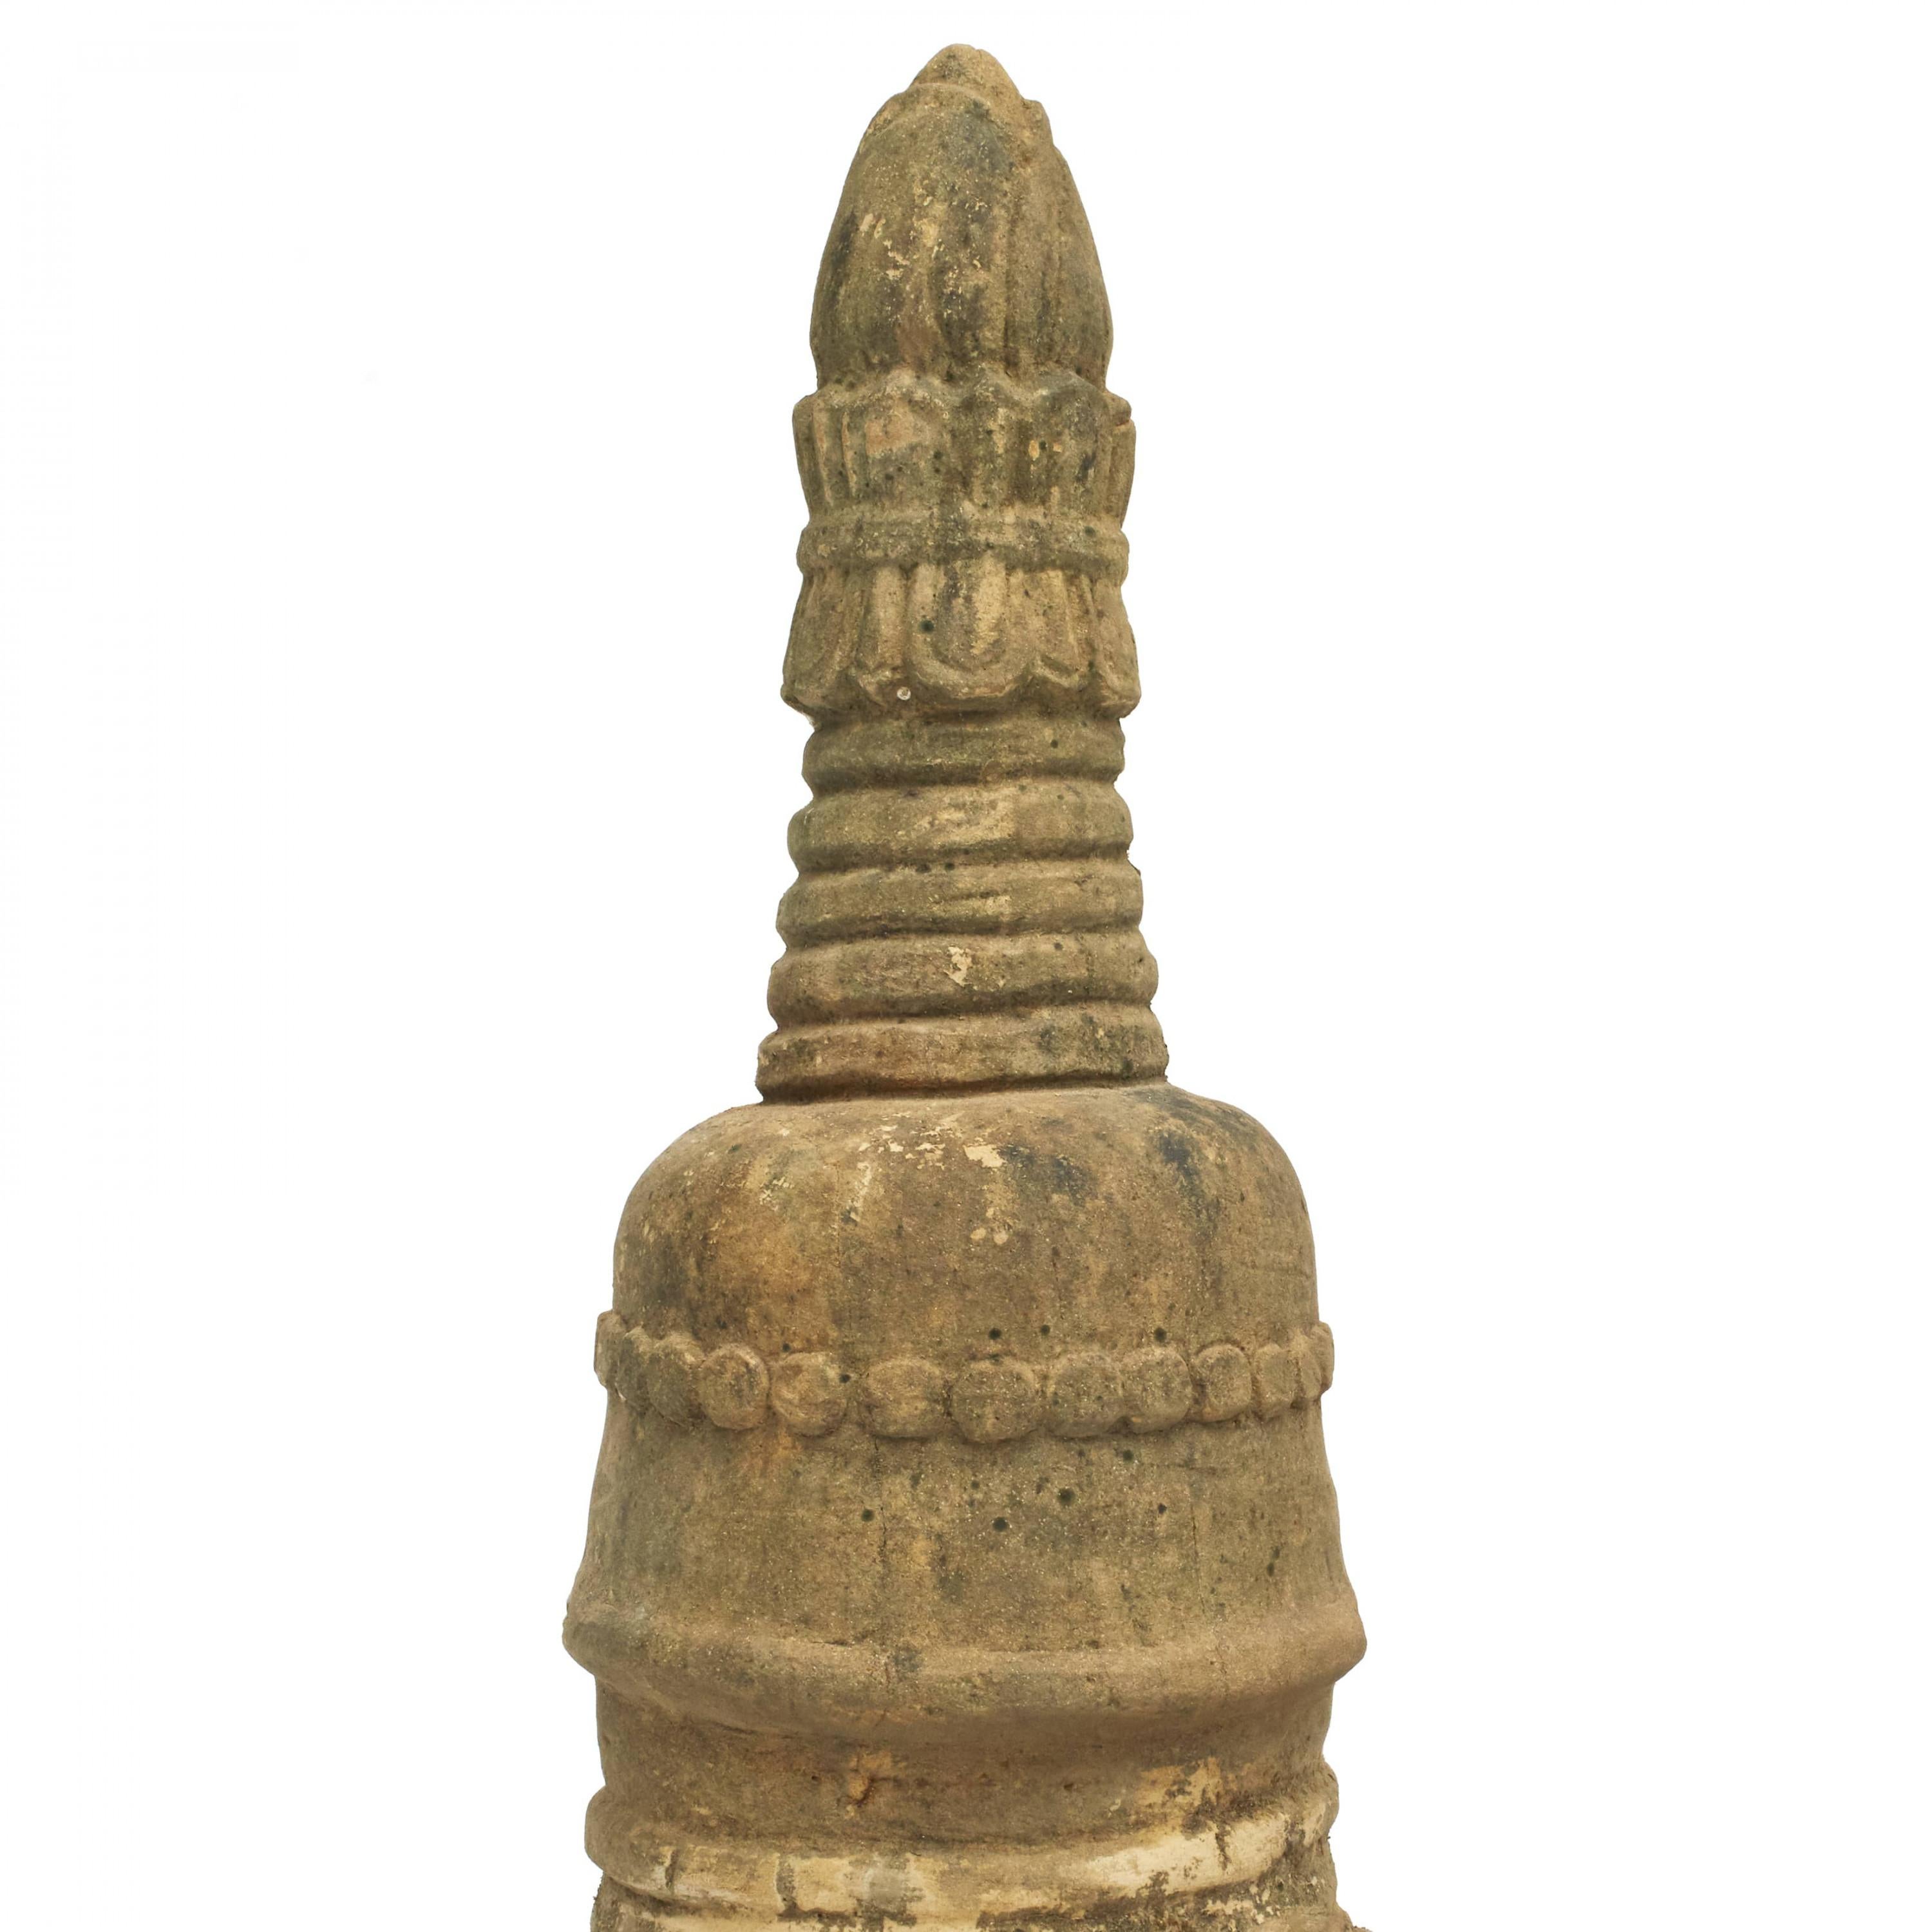 400-600 Year Old Burmese Sandstone Stupa Pagoda Sculpture In Good Condition For Sale In Kastrup, DK